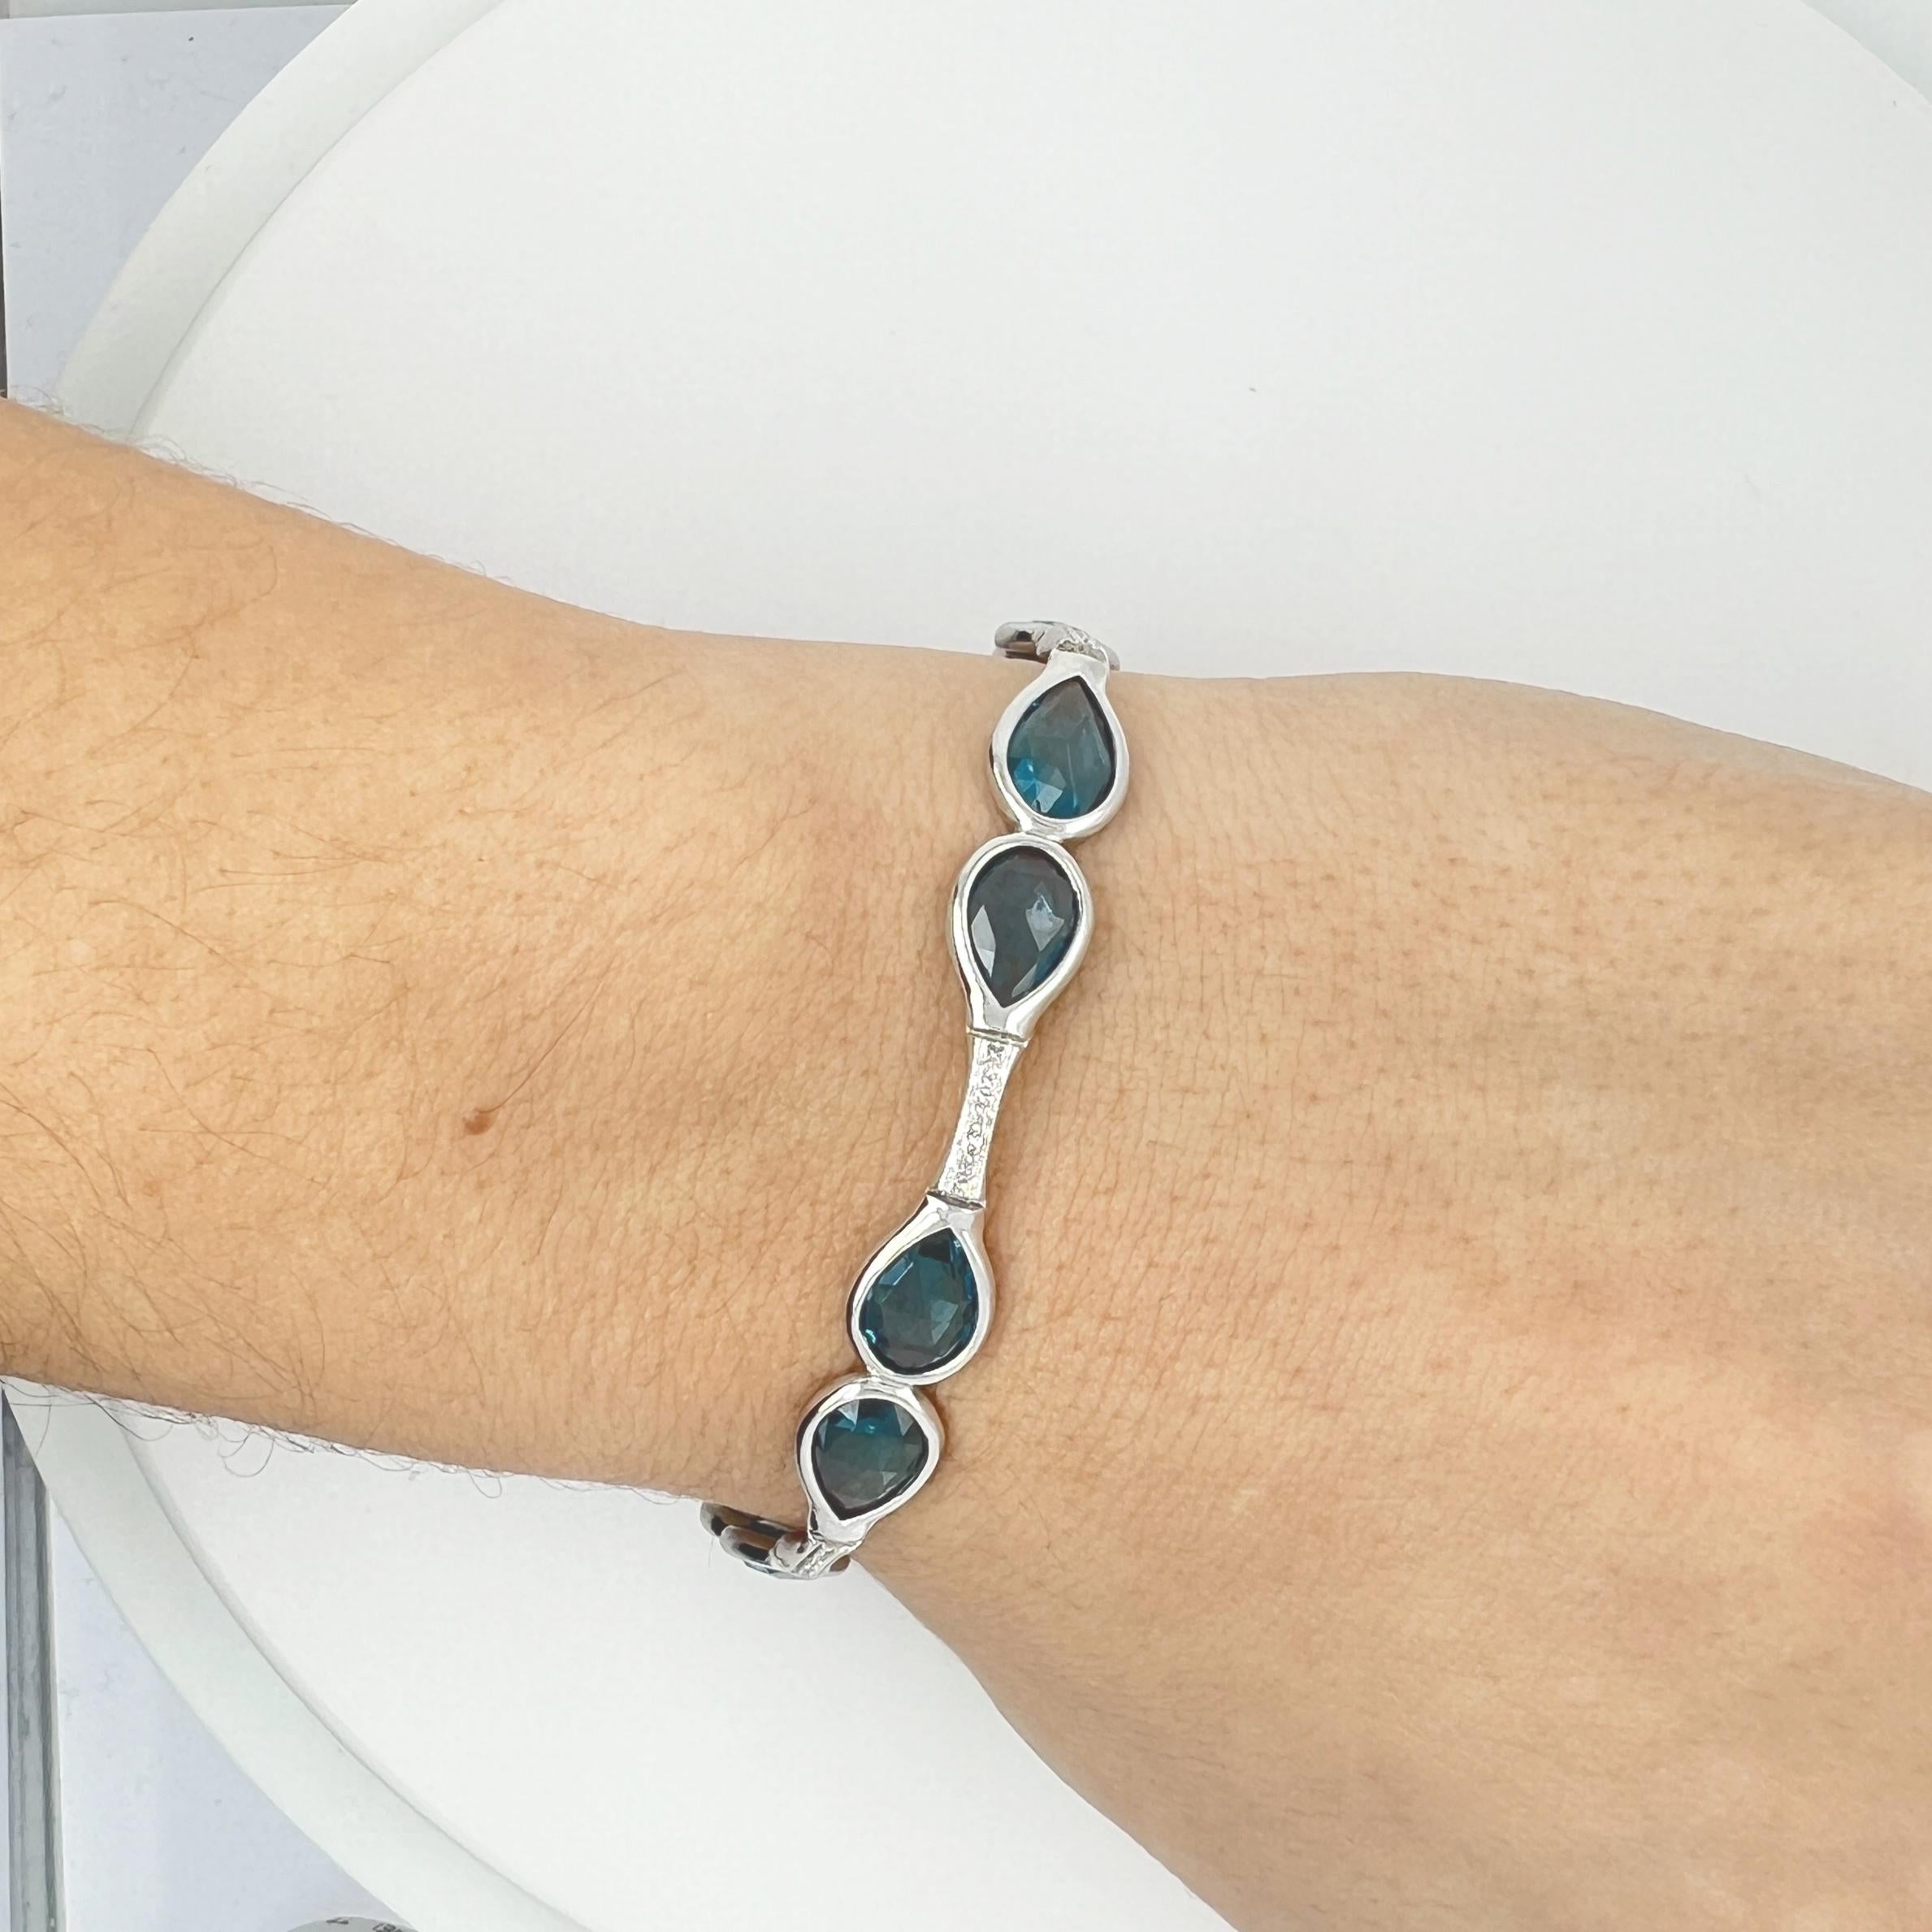 Brilliant Cut Bracelet in 18k gold with Diamonds and Blue Topaz drops For Sale